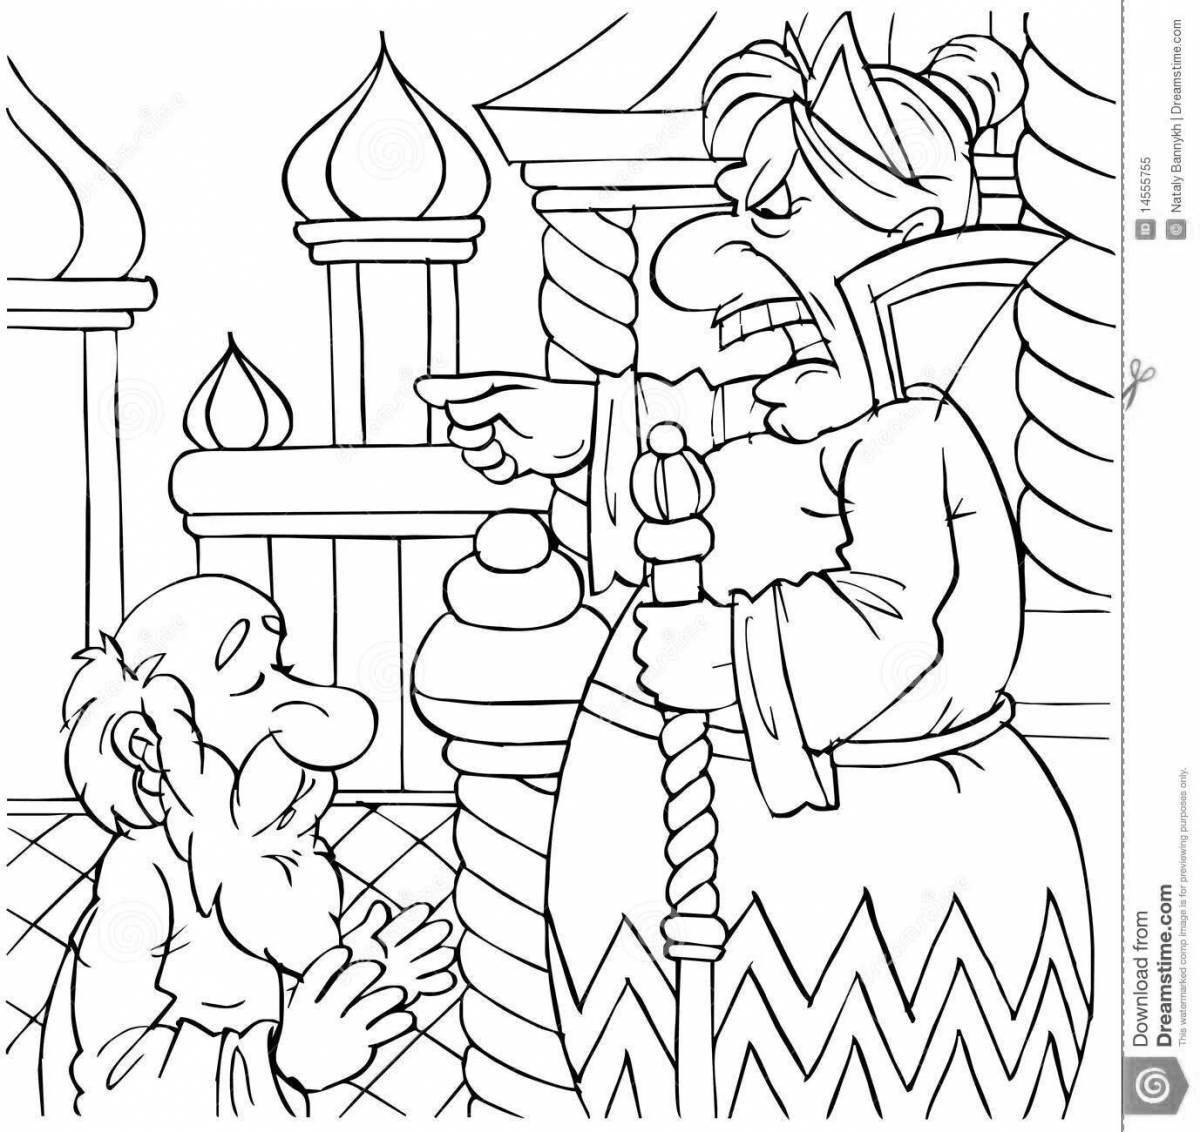 Amazing old man coloring page with goldfish